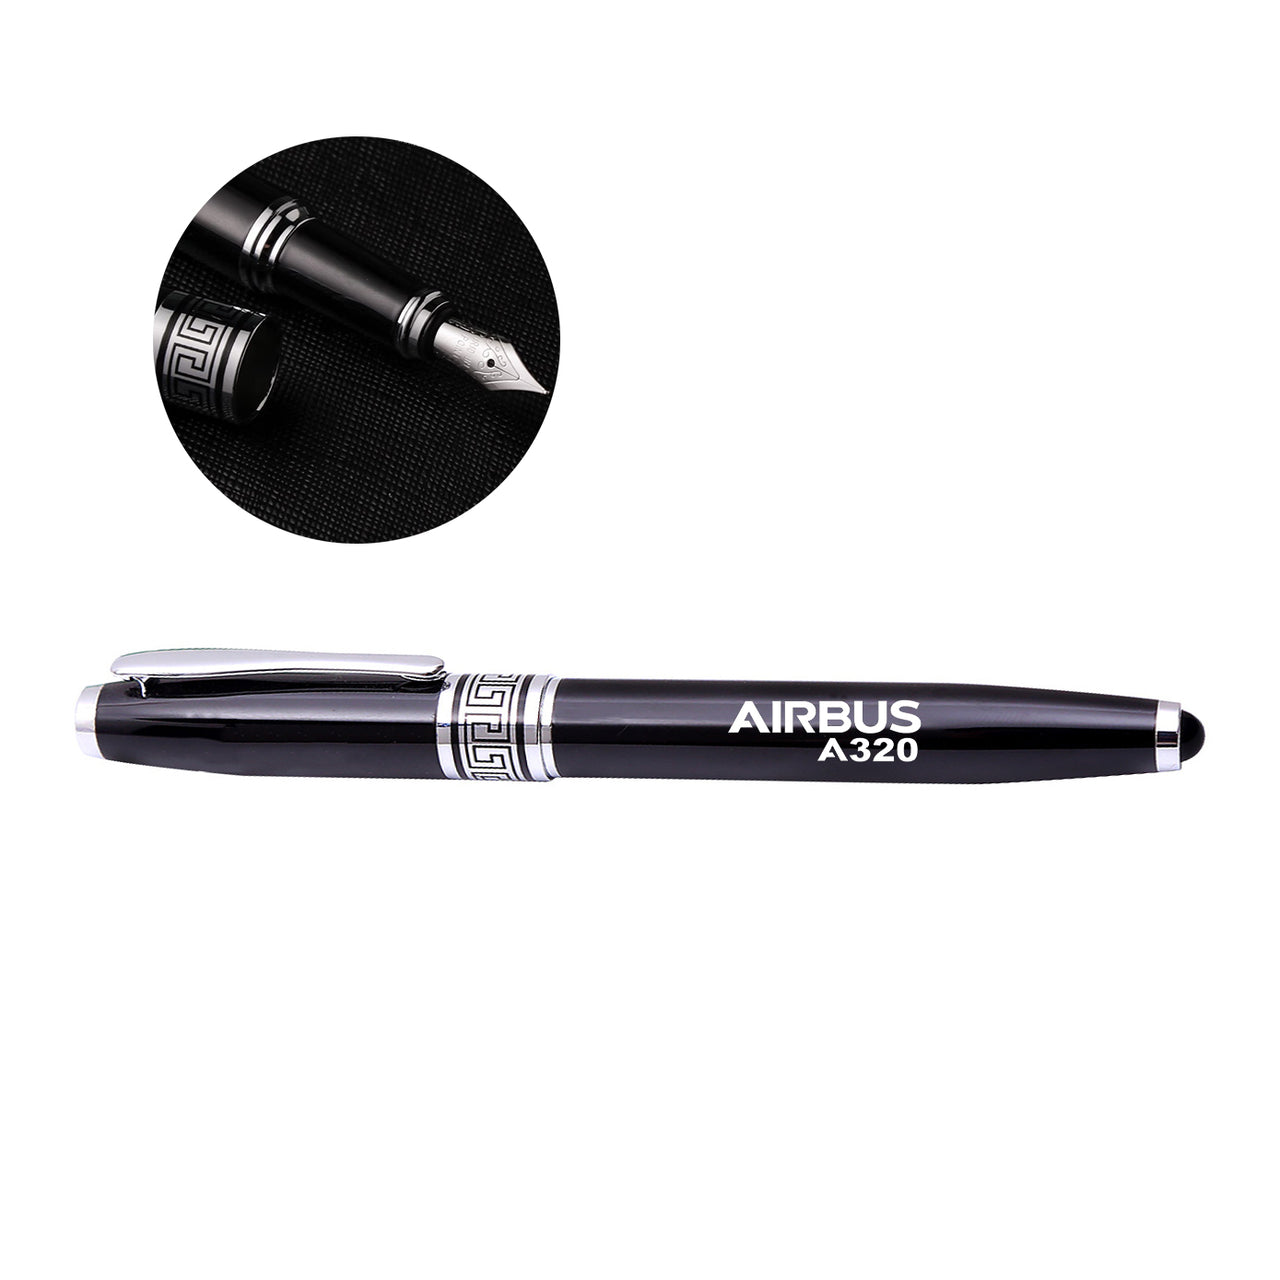 Airbus A320 & Text Designed Pens